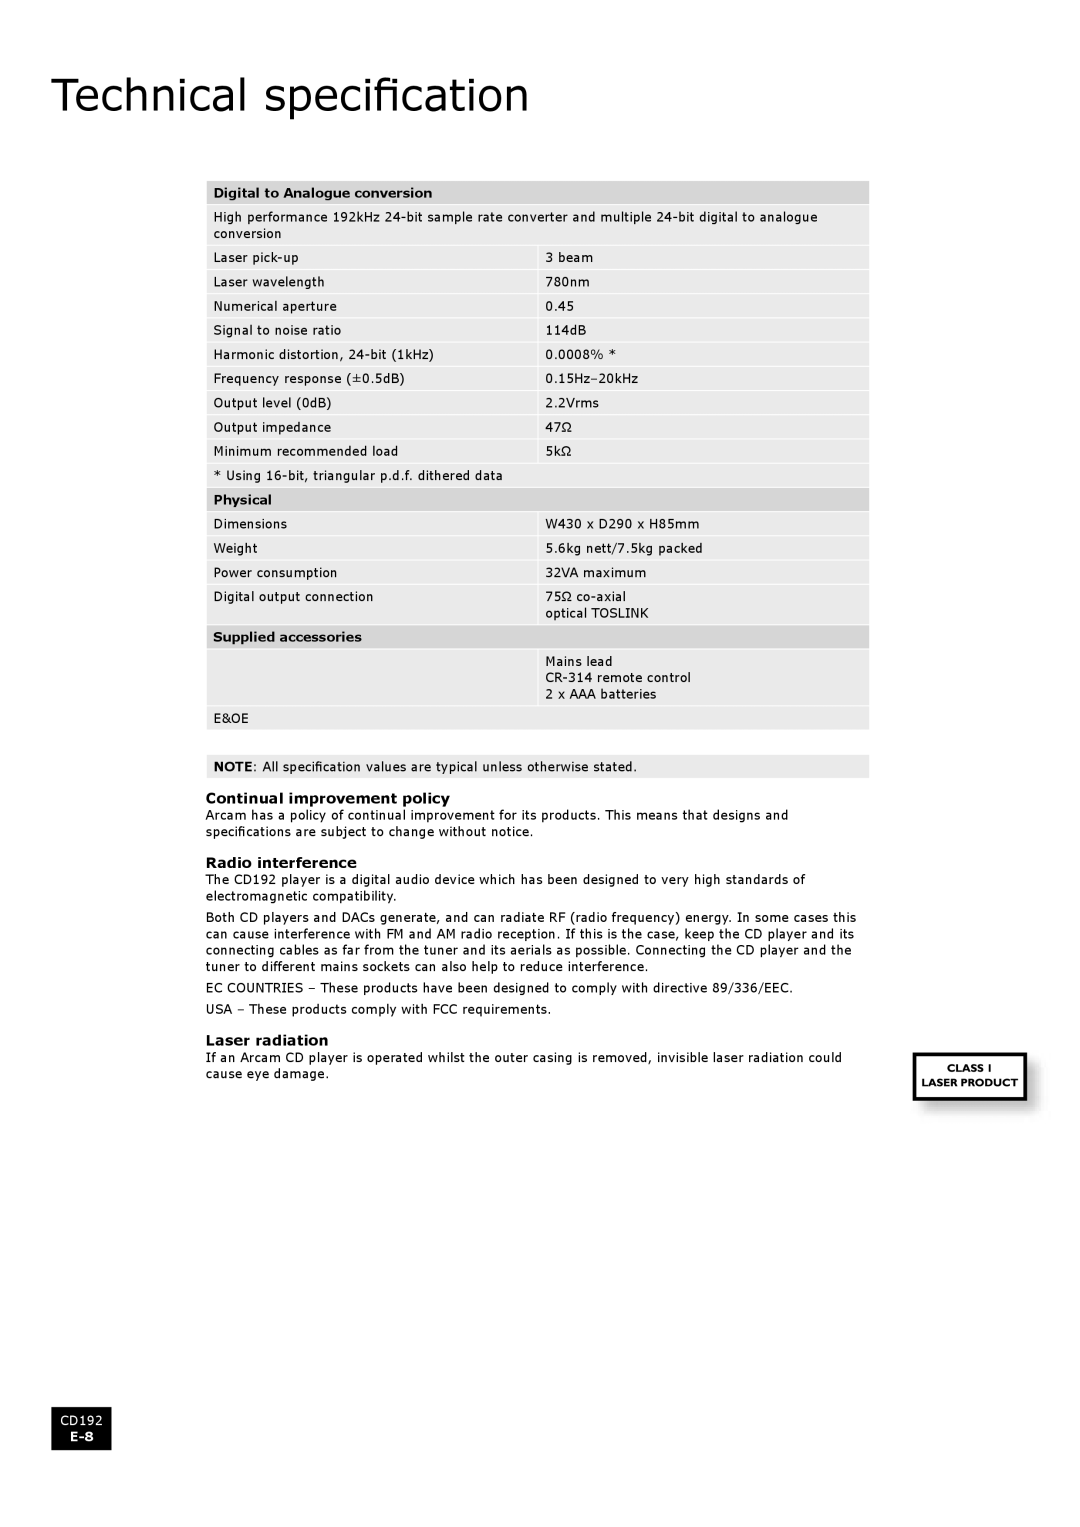 Arcam CD192 manual Technical specification, Continual improvement policy, Radio interference, Laser radiation 